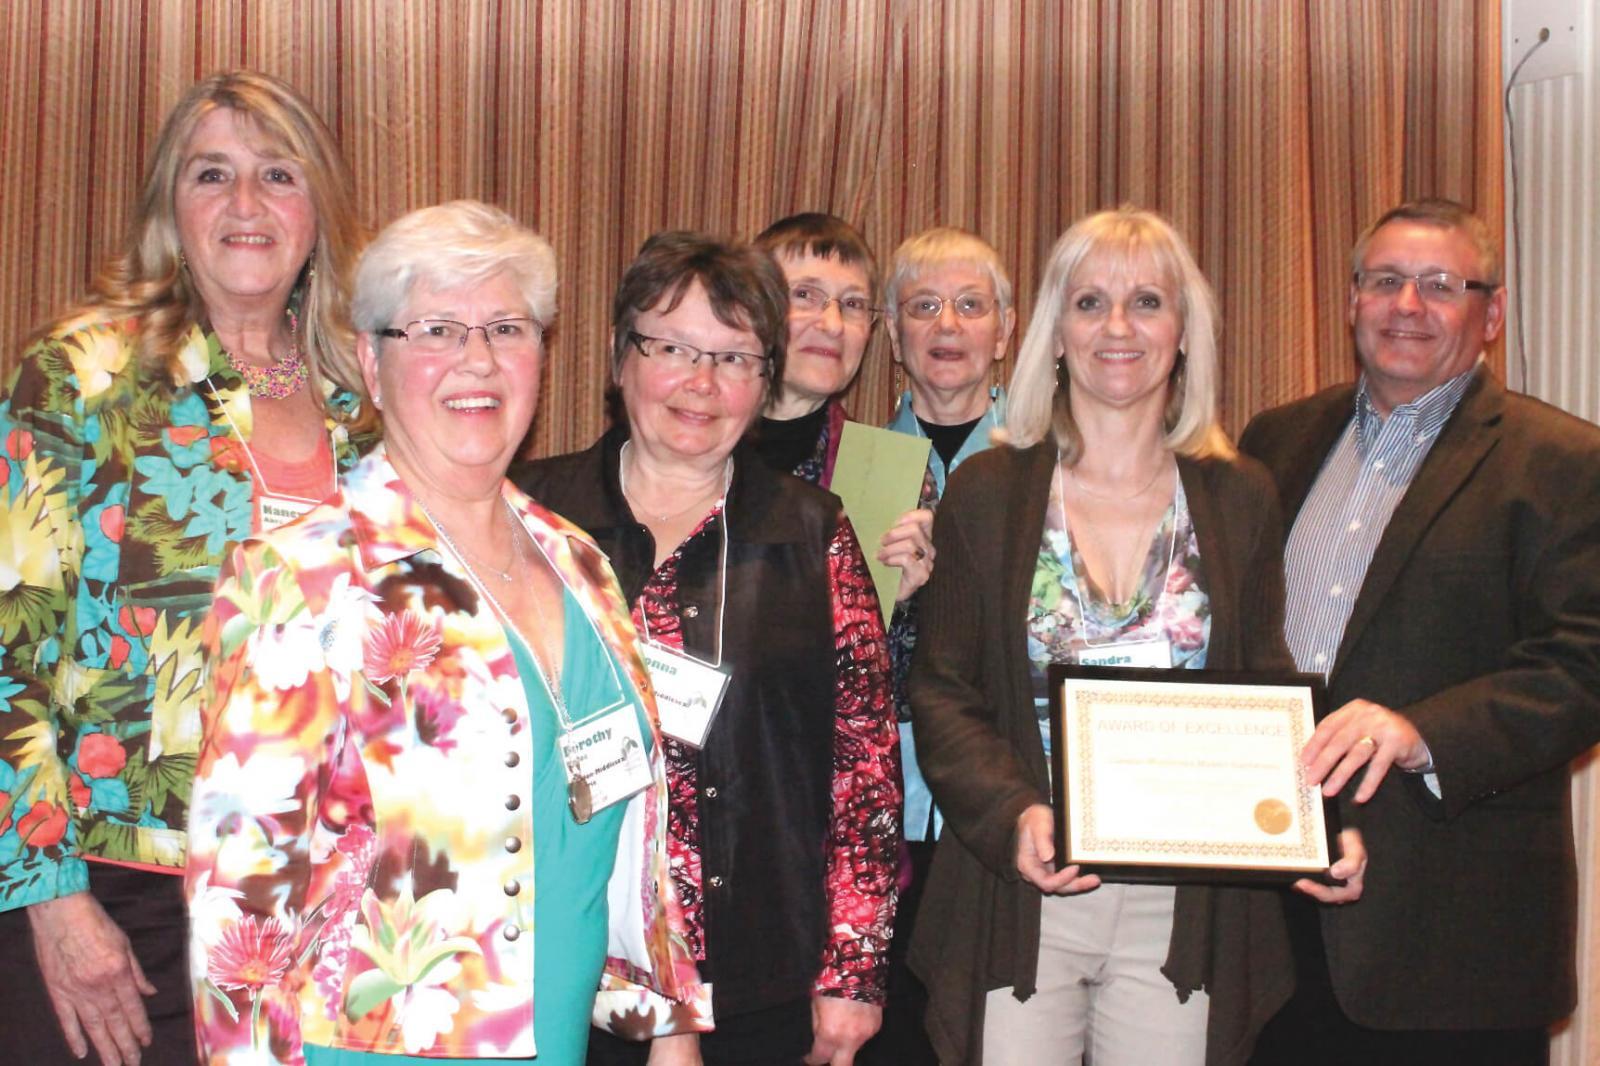 The London Middlesex Master Gardeners’ community service project ‘From Seeds to Your Table’ received the Landscape Ontario Award, presented by LO’s public relations director Denis Flanagan.